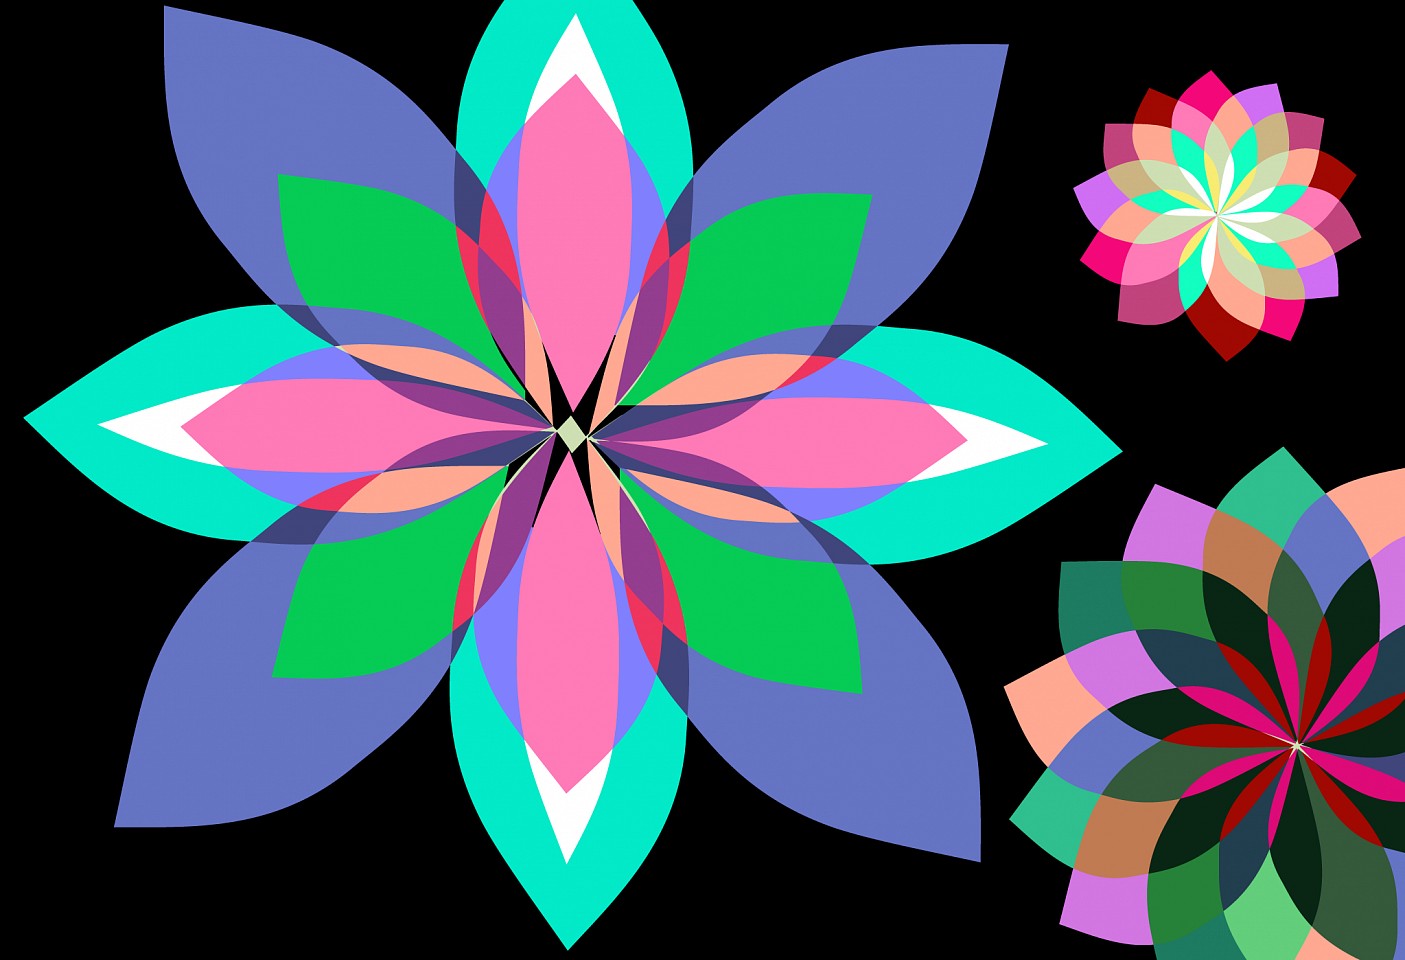 Dane Albert, Floral #5 Night, 2023
Acrylic on canvas (Concept), 48 x 72 in. (121.9 x 182.9 cm)
Series of colored lines and shapes in multiple configurations
DA.2023.floral-005-night